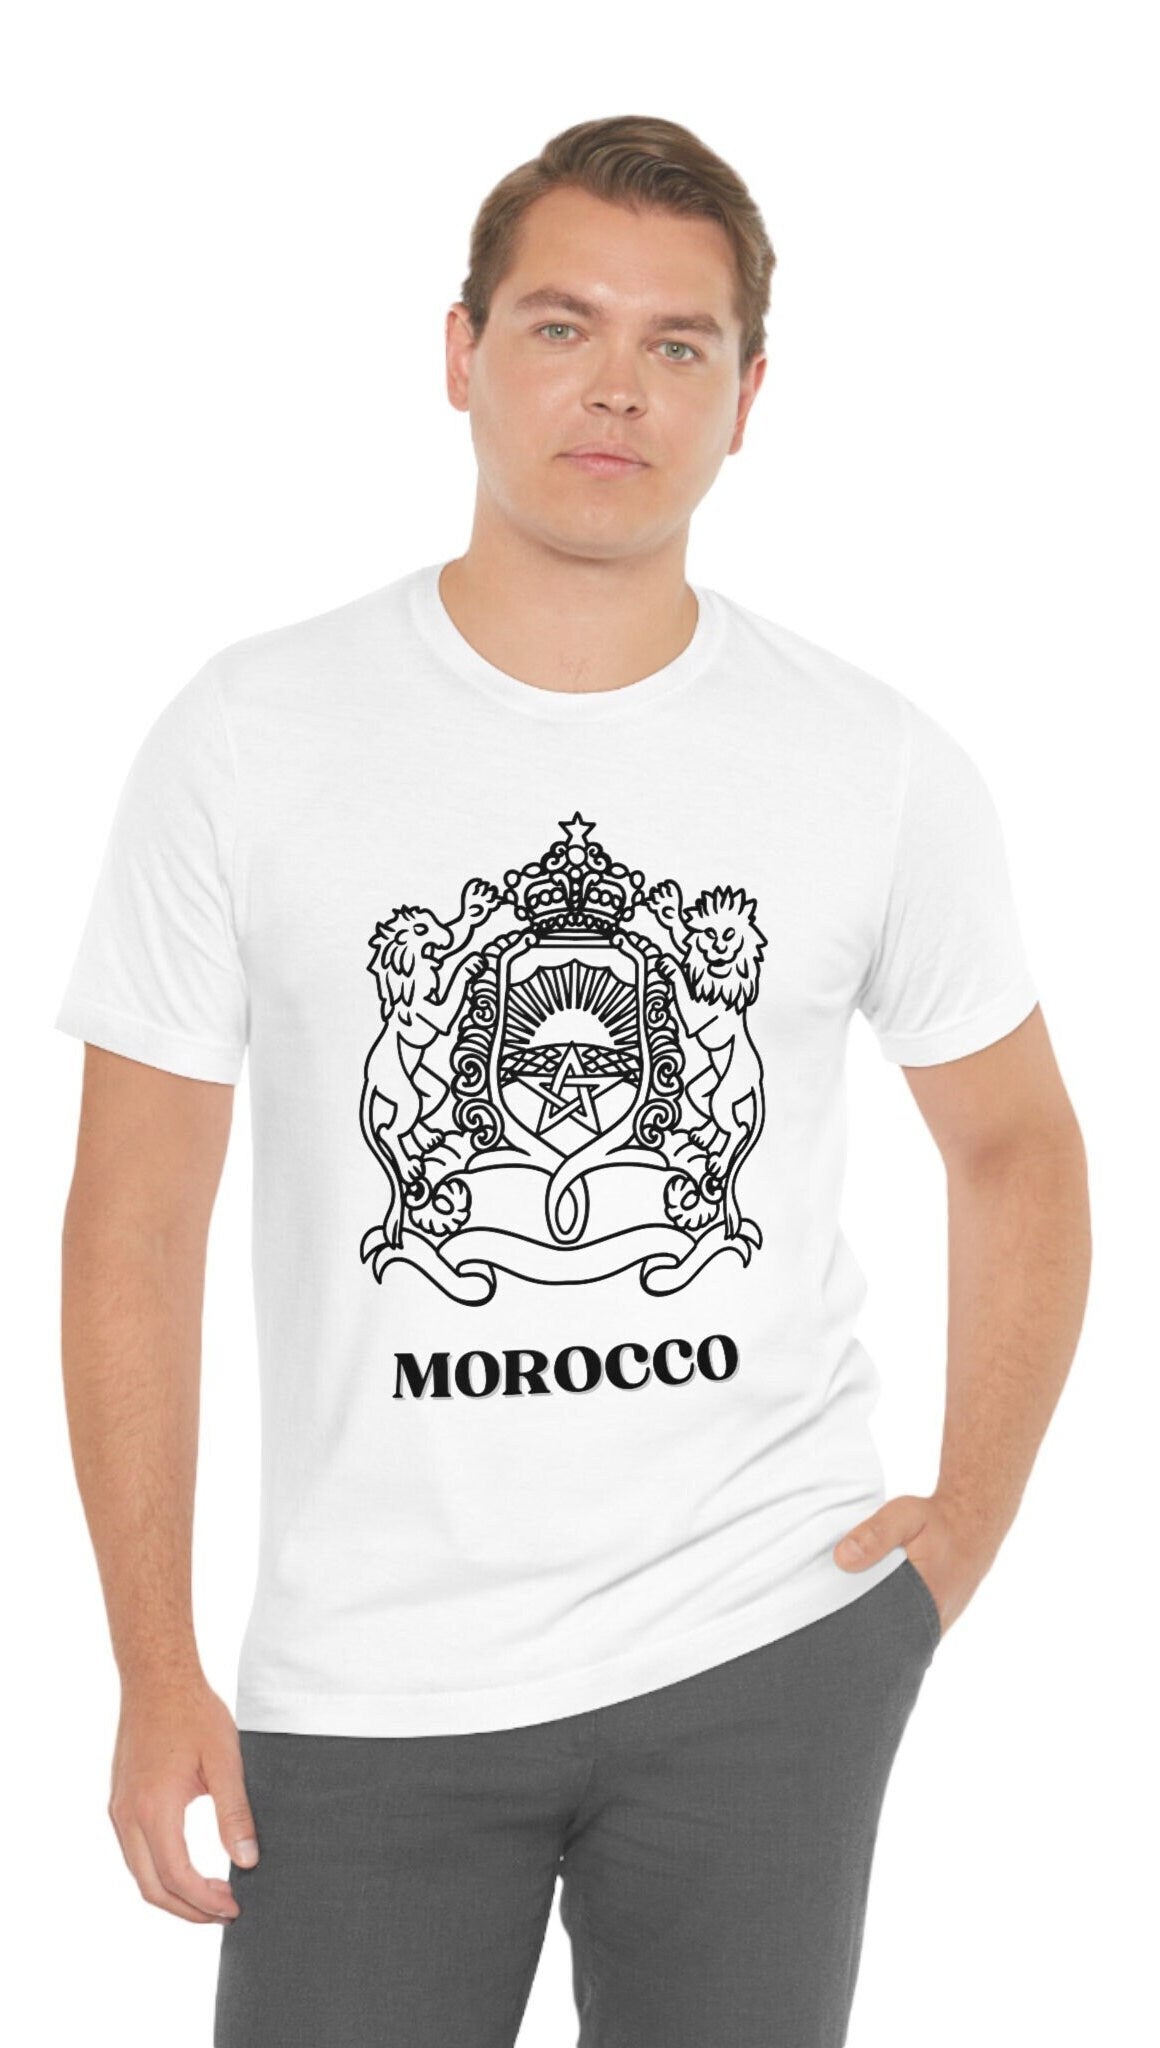 Morocco Team Jersey, World Cup Morocco Fan Shirt, FIFA 2022 Morocco Soccer lover, Morocco Lovers Jersey, Morocco Short Sleeve Tee